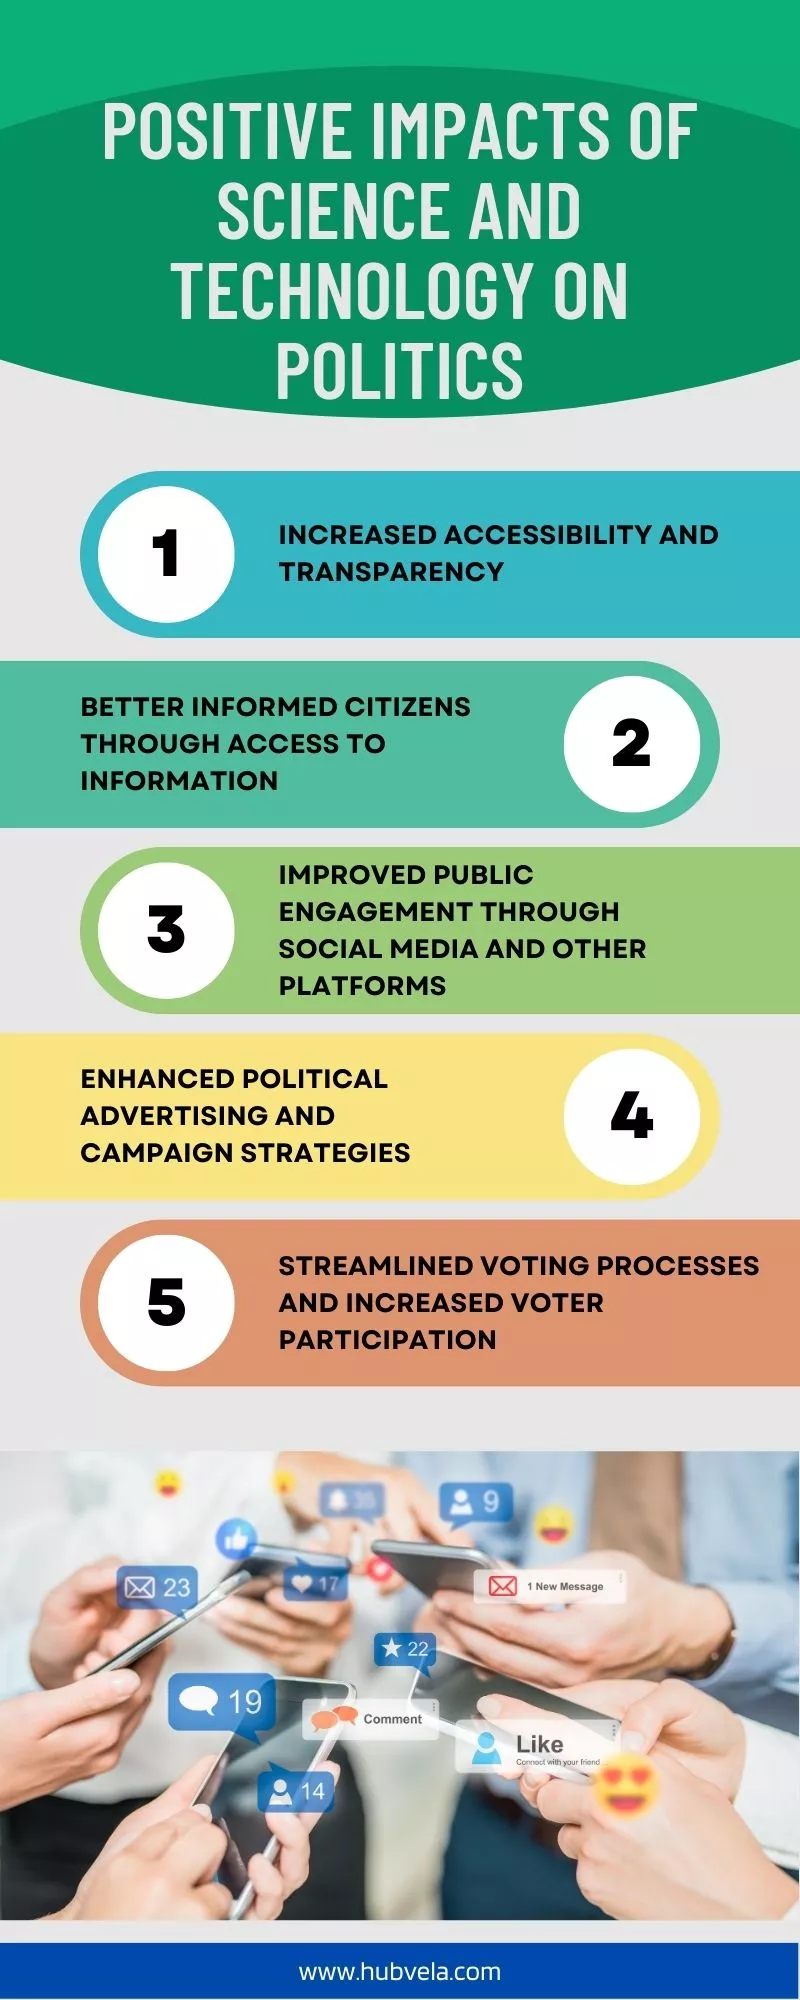 Positive Impacts of Science and Technology on Politics infographic